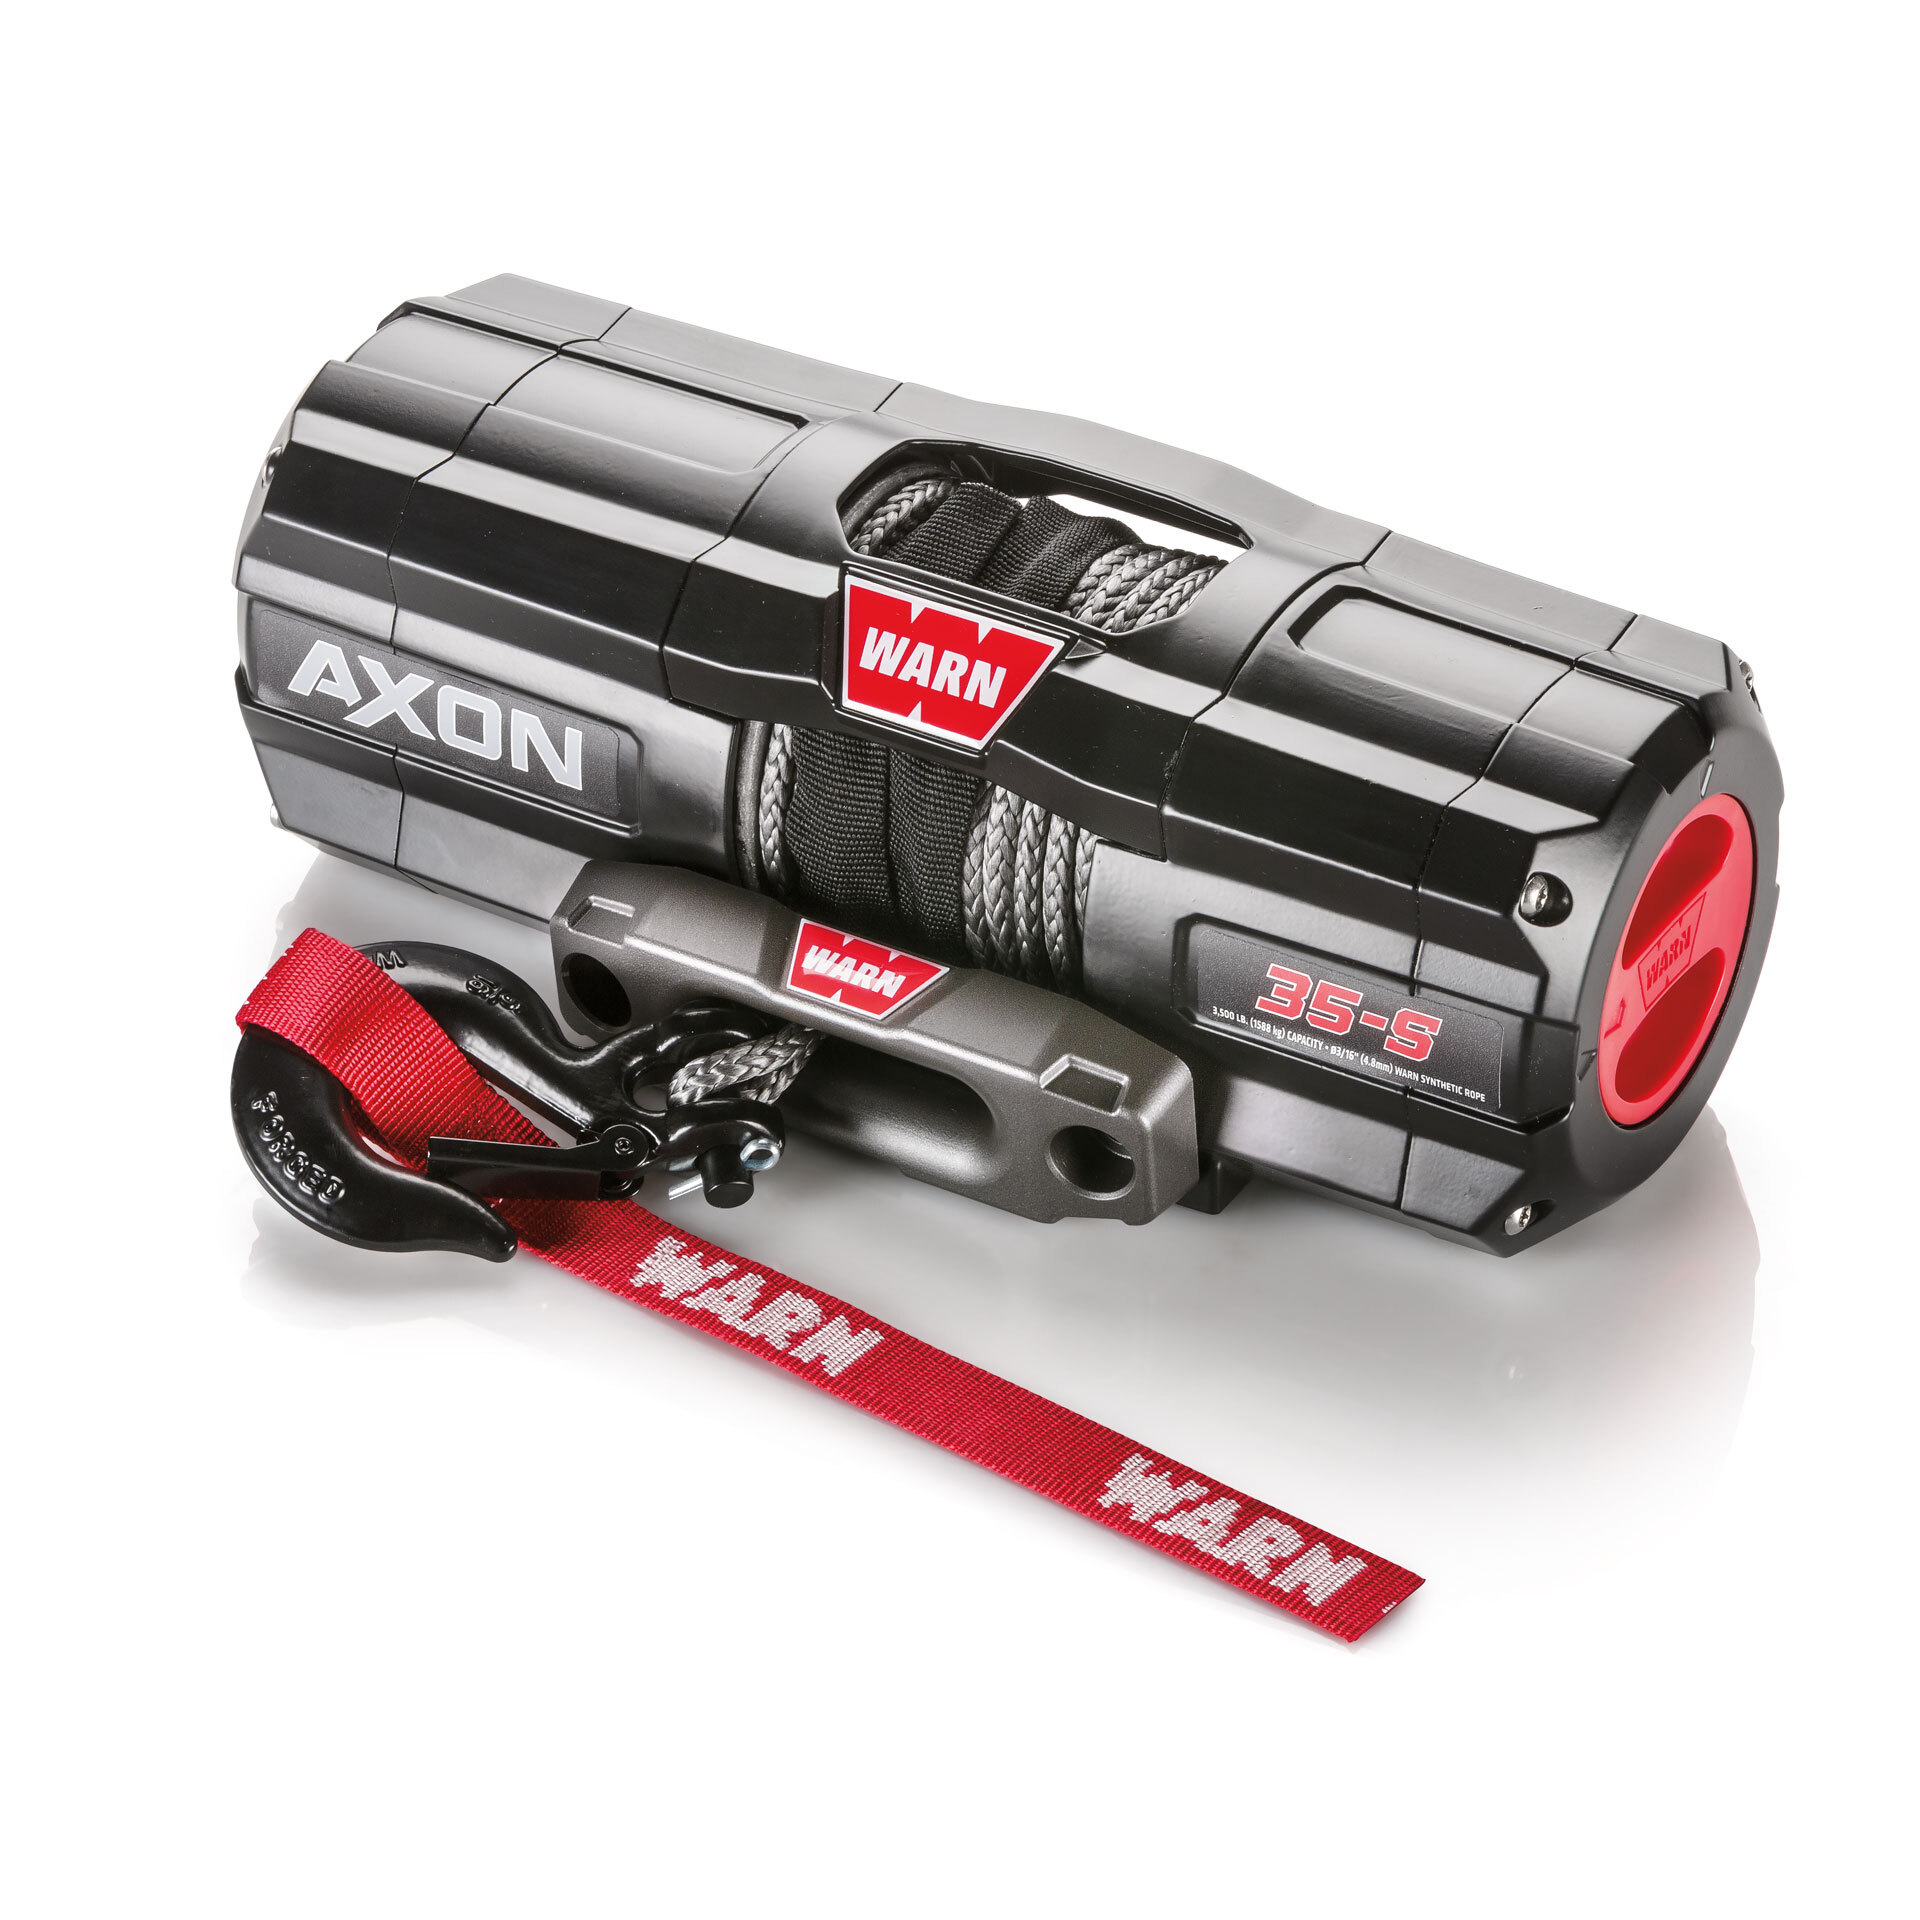 WARN® AXON 3500 Winch with Synthetic Rope